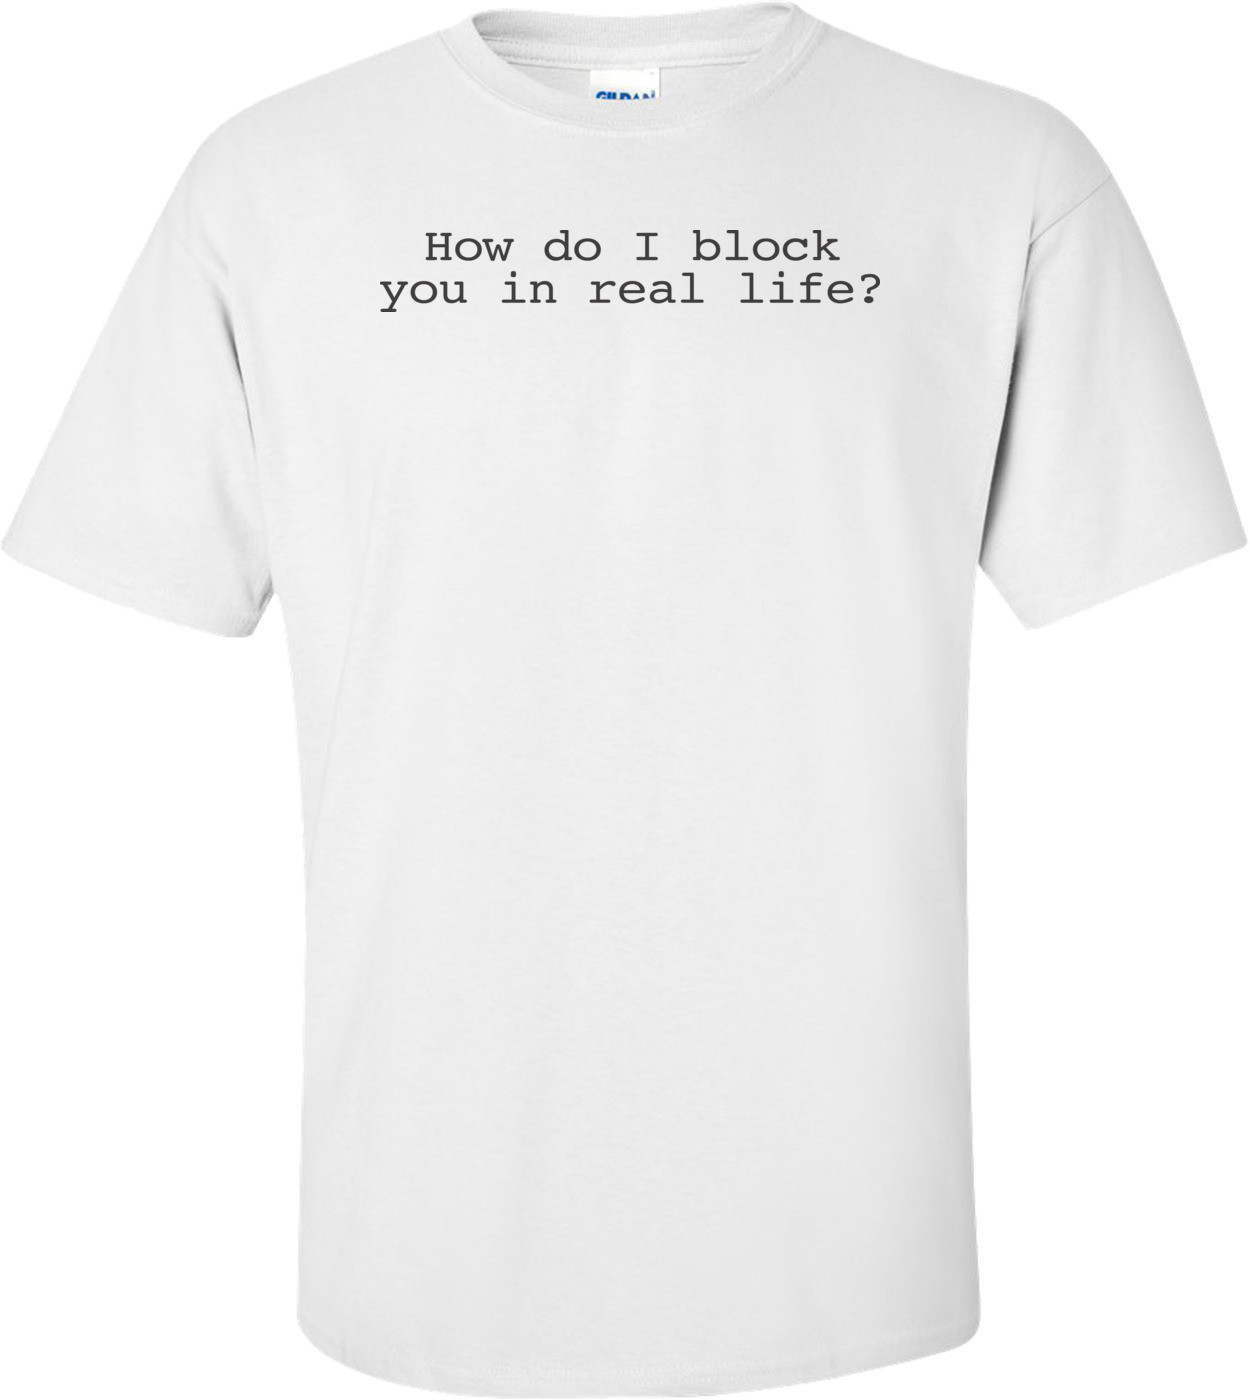 How Do I Block You In Real Life? T-shirt